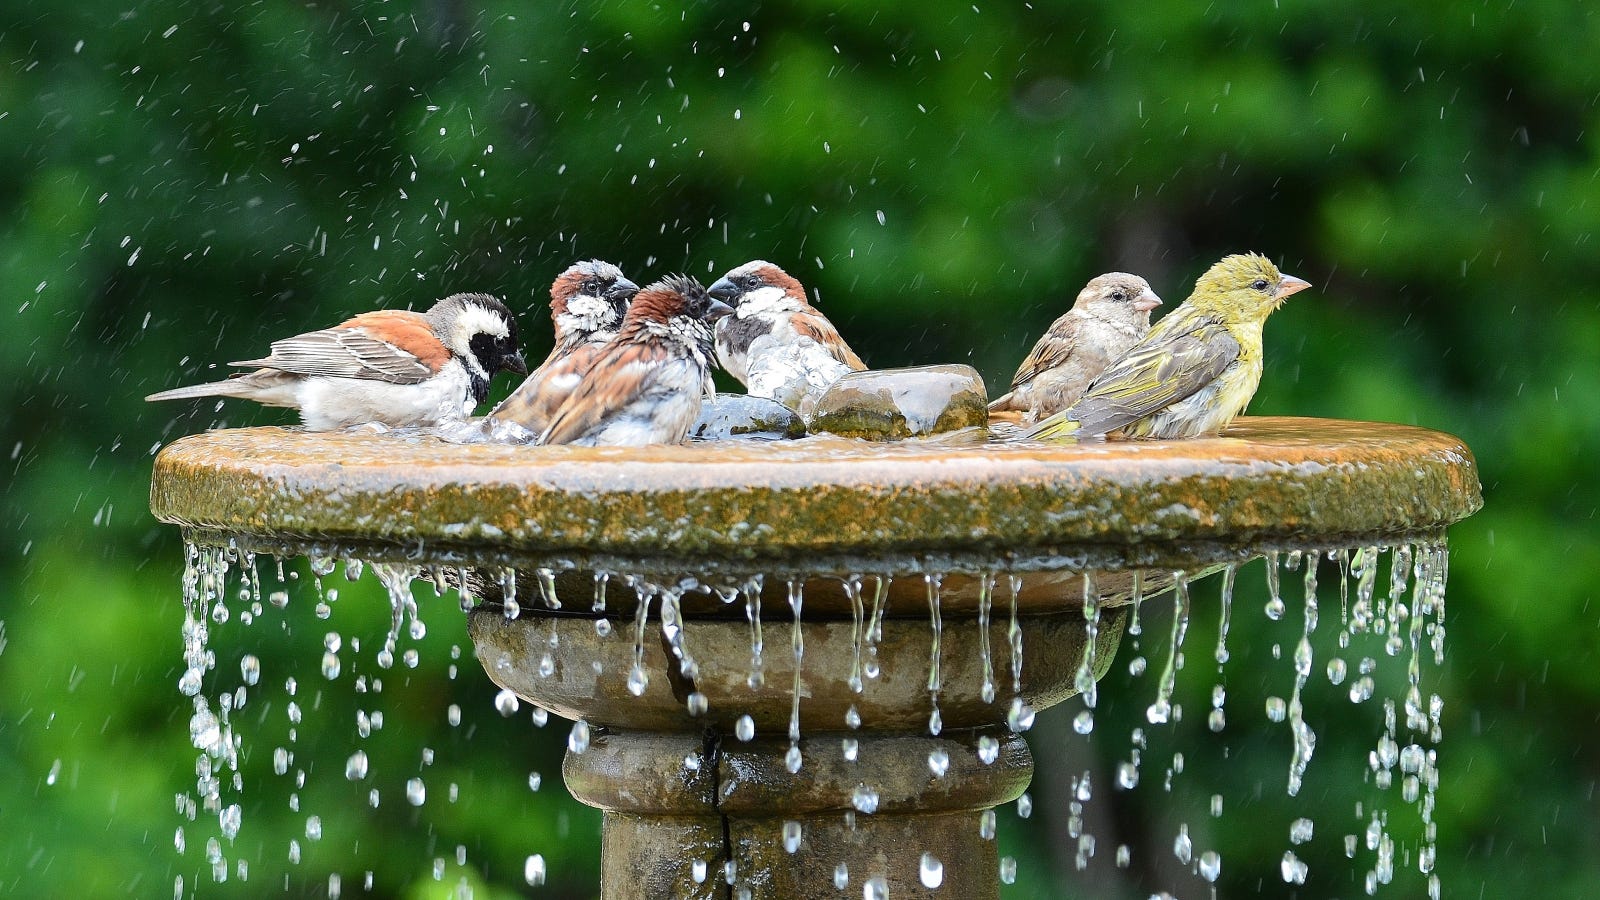 11 of the Best Birdbaths: Your Guide to Water Features for Your Feathered Friends 4